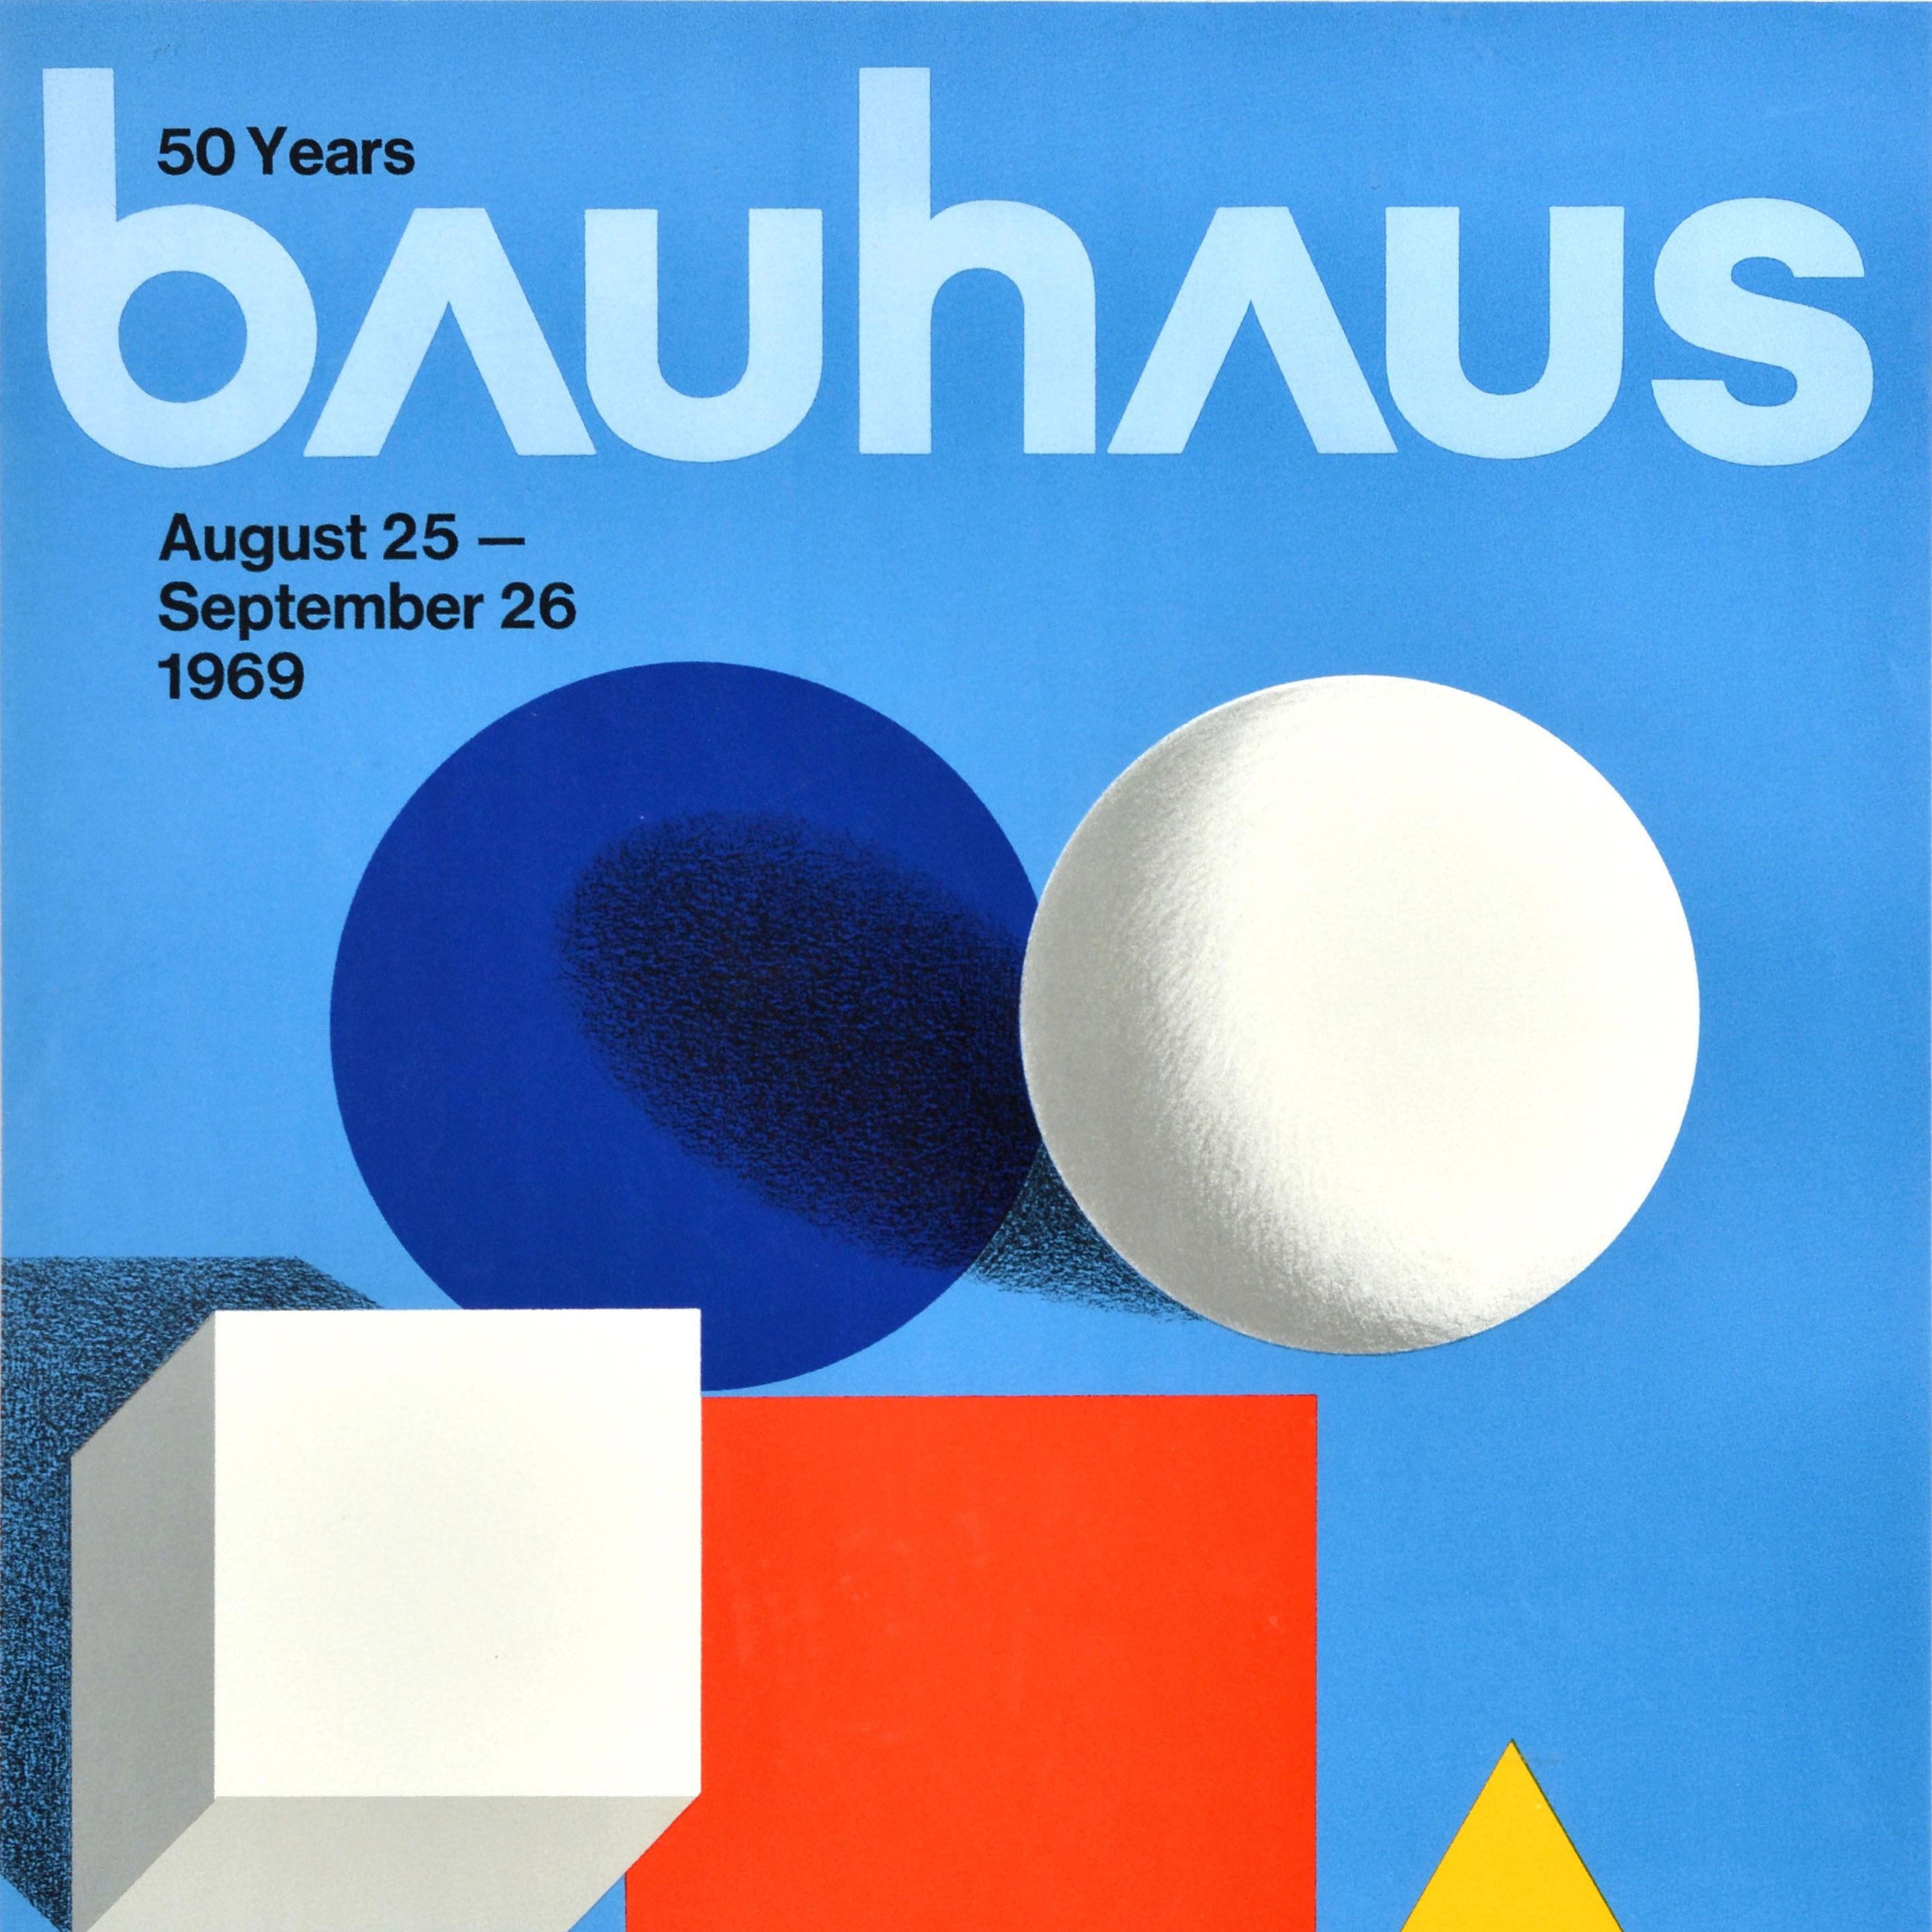 Original vintage exhibition poster for 50 Years Bauhaus held from 25 August to 26 September 1969 held at the S.R. Crown Hall Illinois Institute of Technology Chicago (IIT Illinois Tech; founded 1890) featuring minimalist composition including a blue